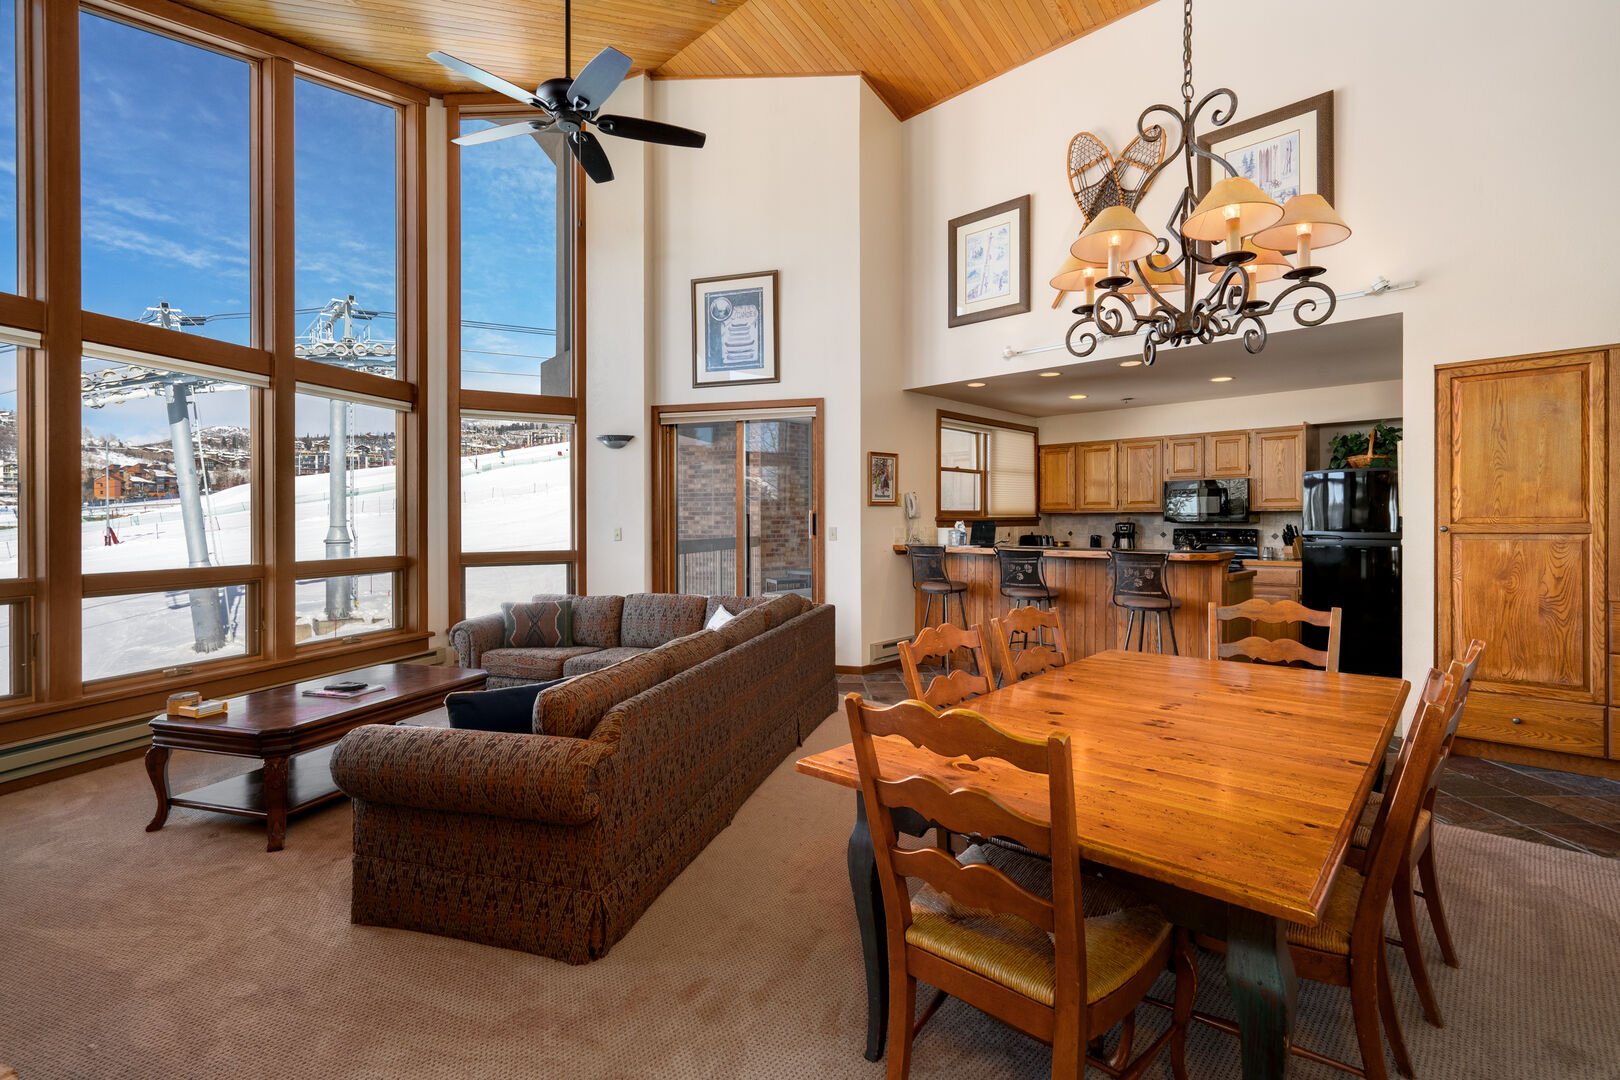 Sand Mountain's open floor plan with vaulted ceiling!